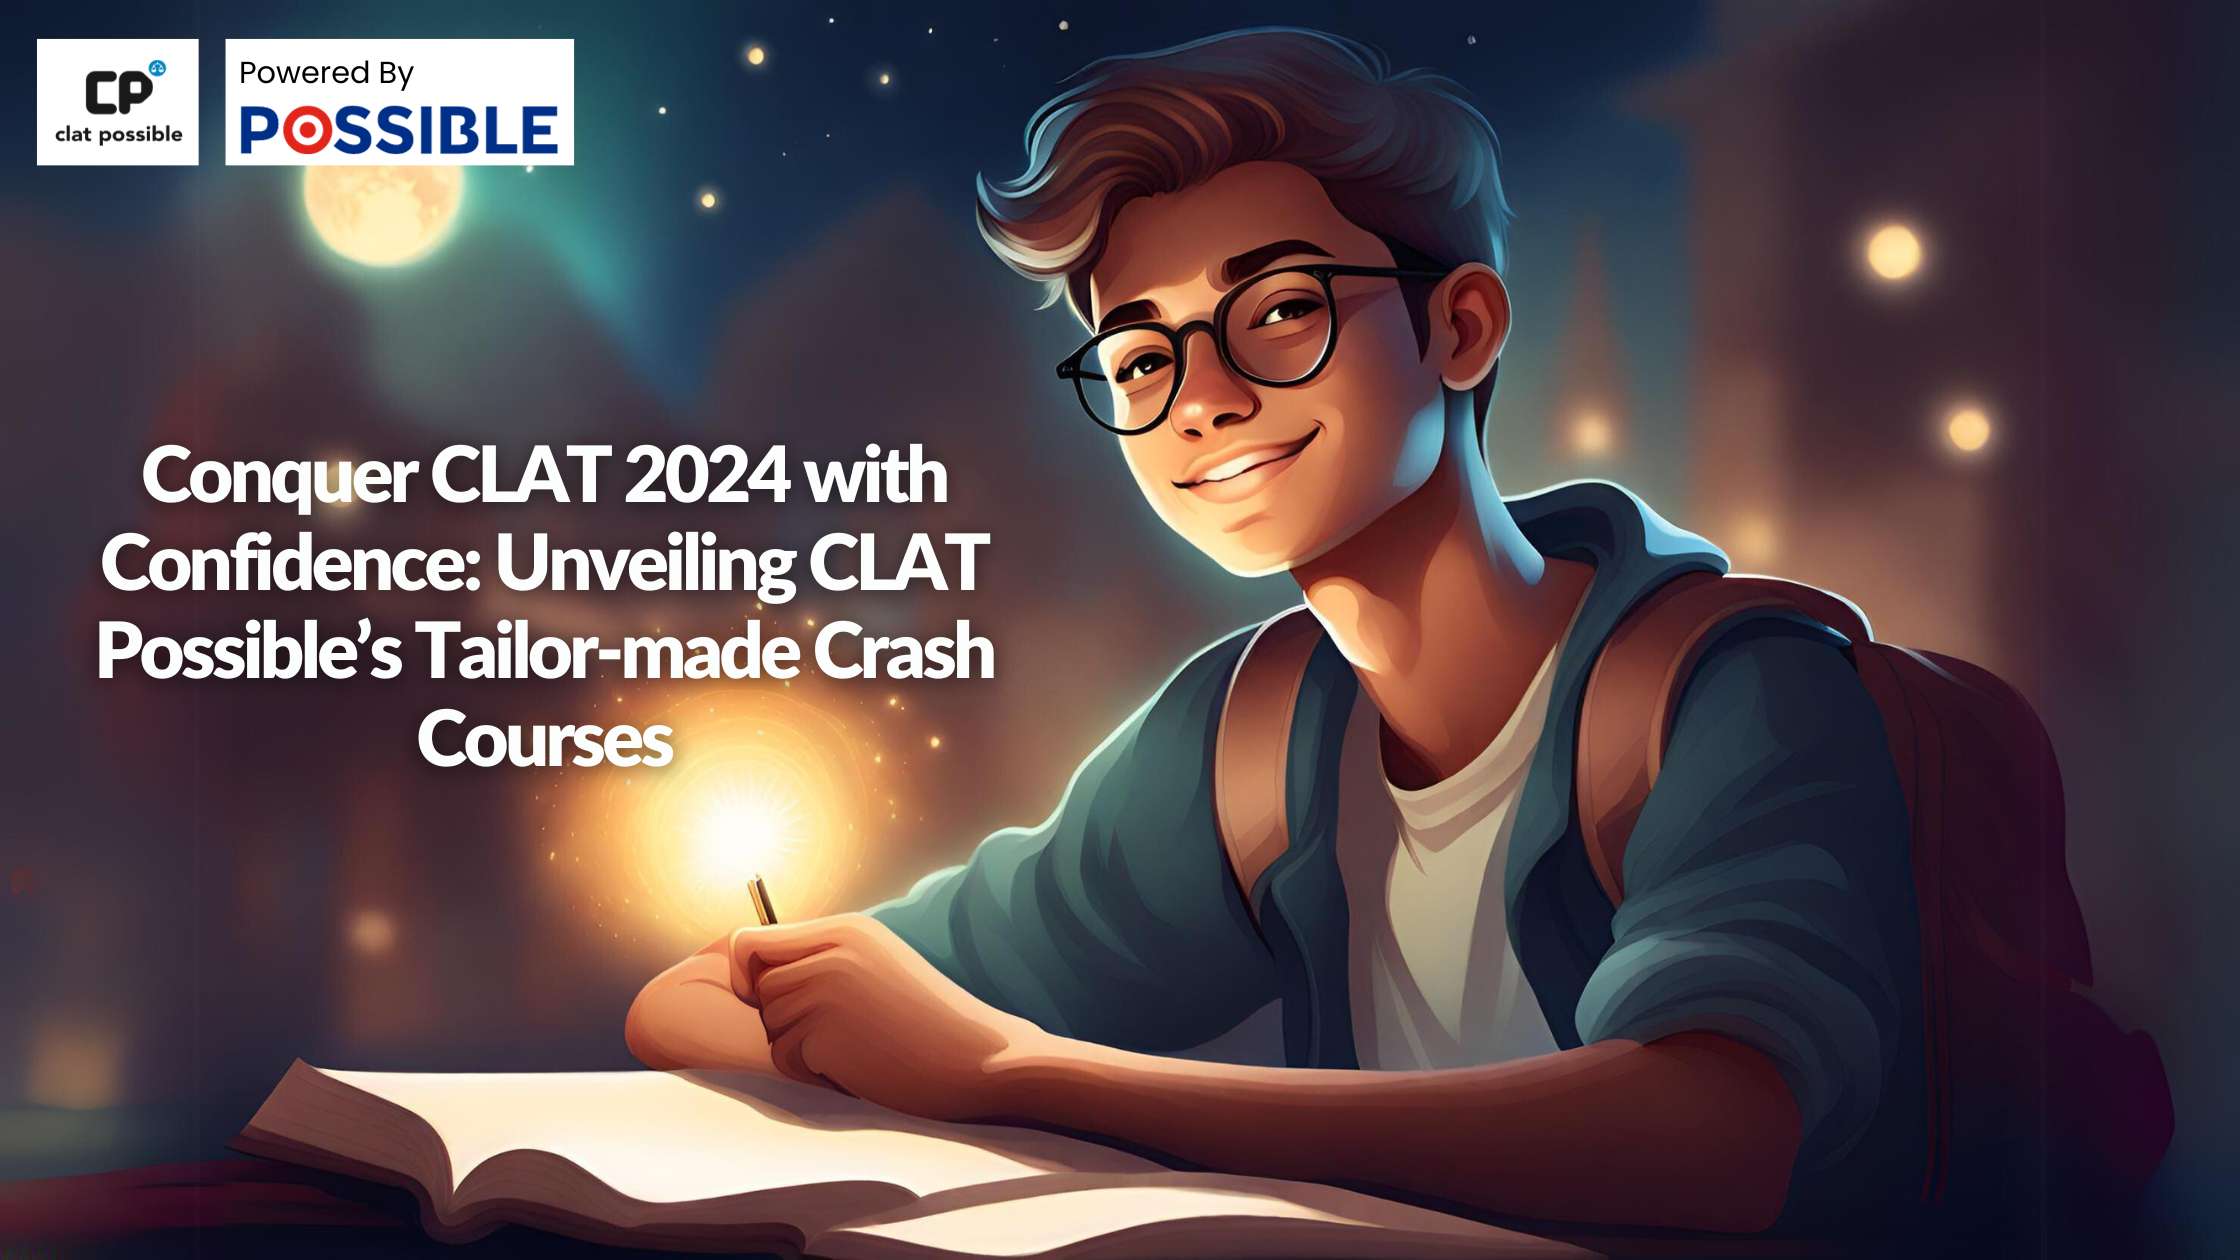 Conquer CLAT 2024 with Confidence: Unveiling CLAT Possible’s Tailor-made Crash Courses